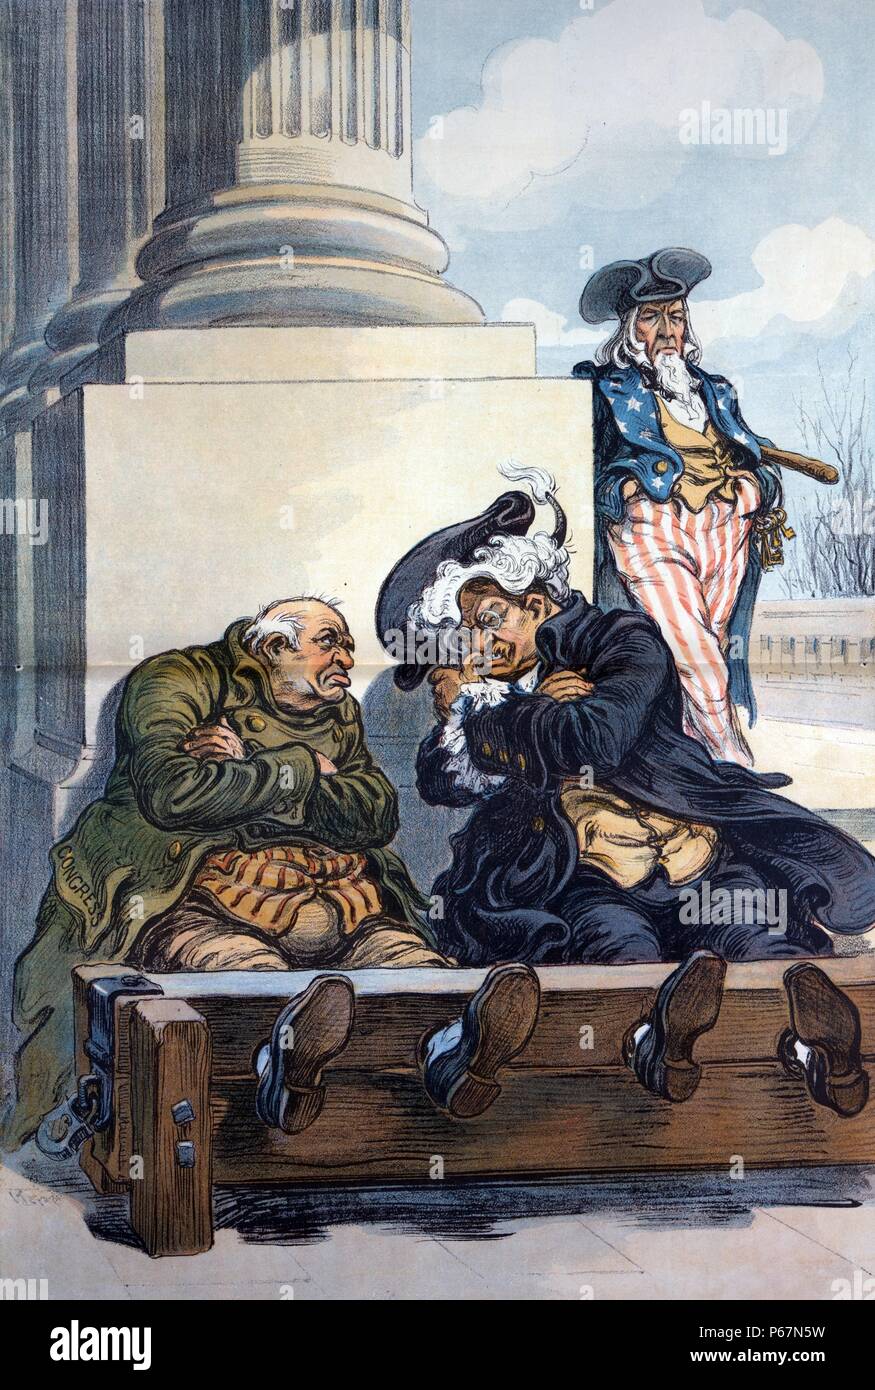 Ye scoldes' Theodore Roosevelt and another man labelled 'Congress' glaring at each other, with their feet locked in stocks; Uncle Sam, as the sheriff, is standing to the right, behind them, leaning against the base of a column. Stock Photo